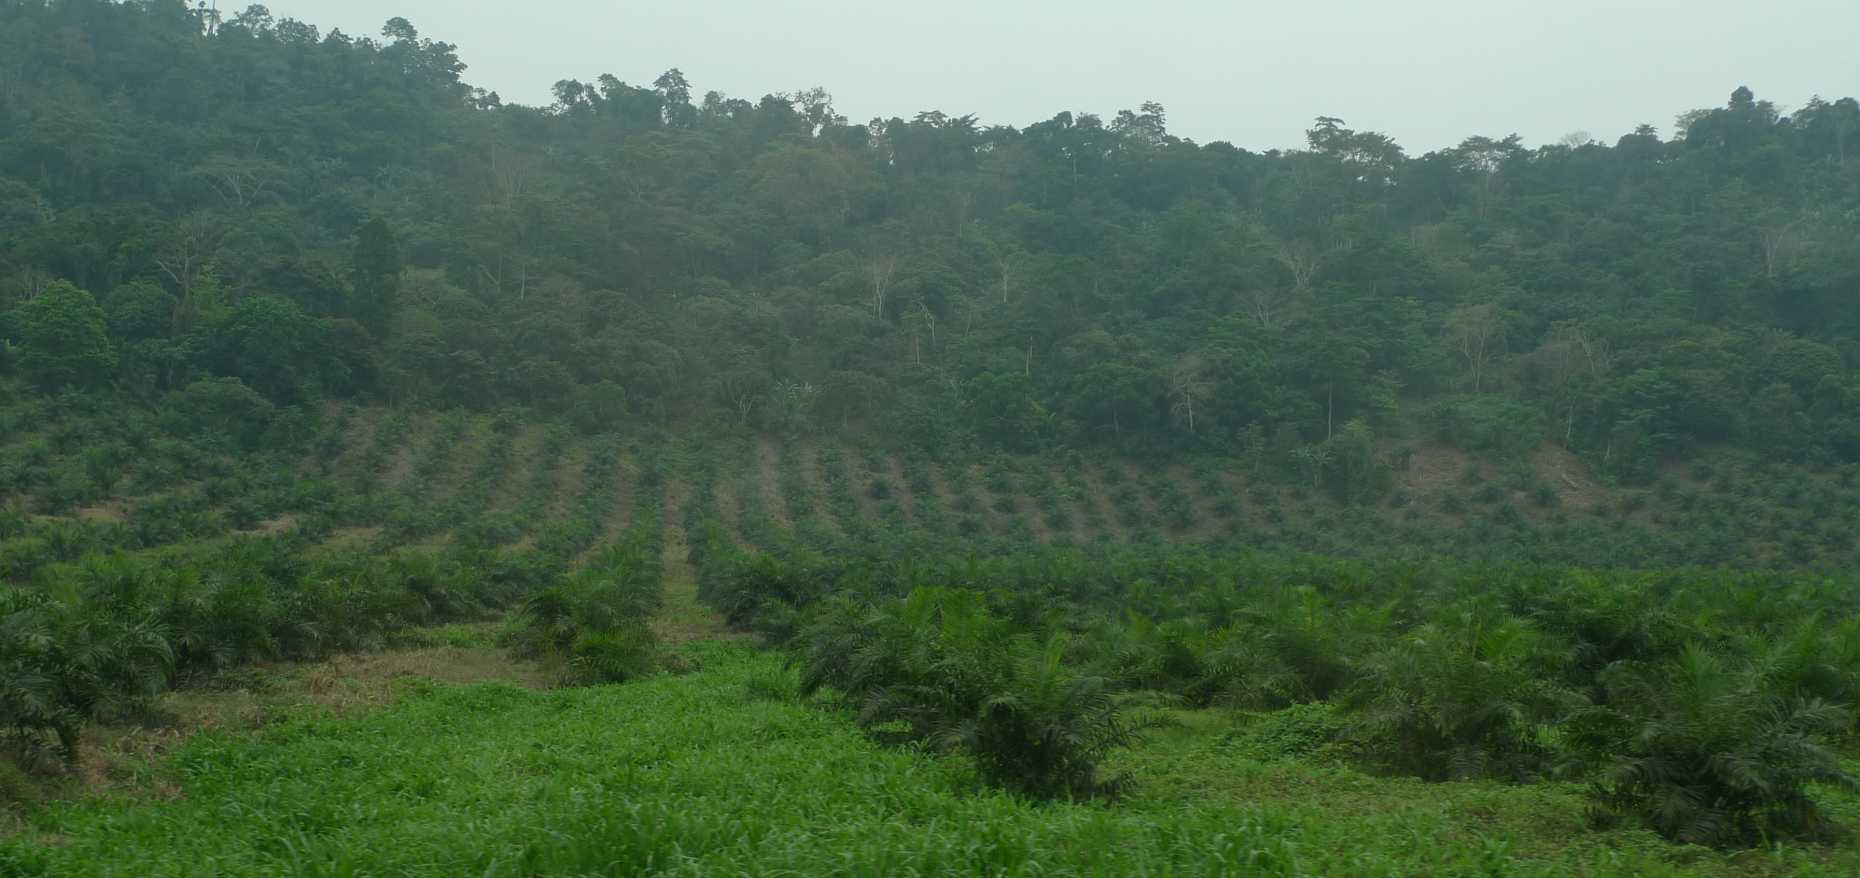 Enlarged view: Oil-palm plantation in Cameroon 